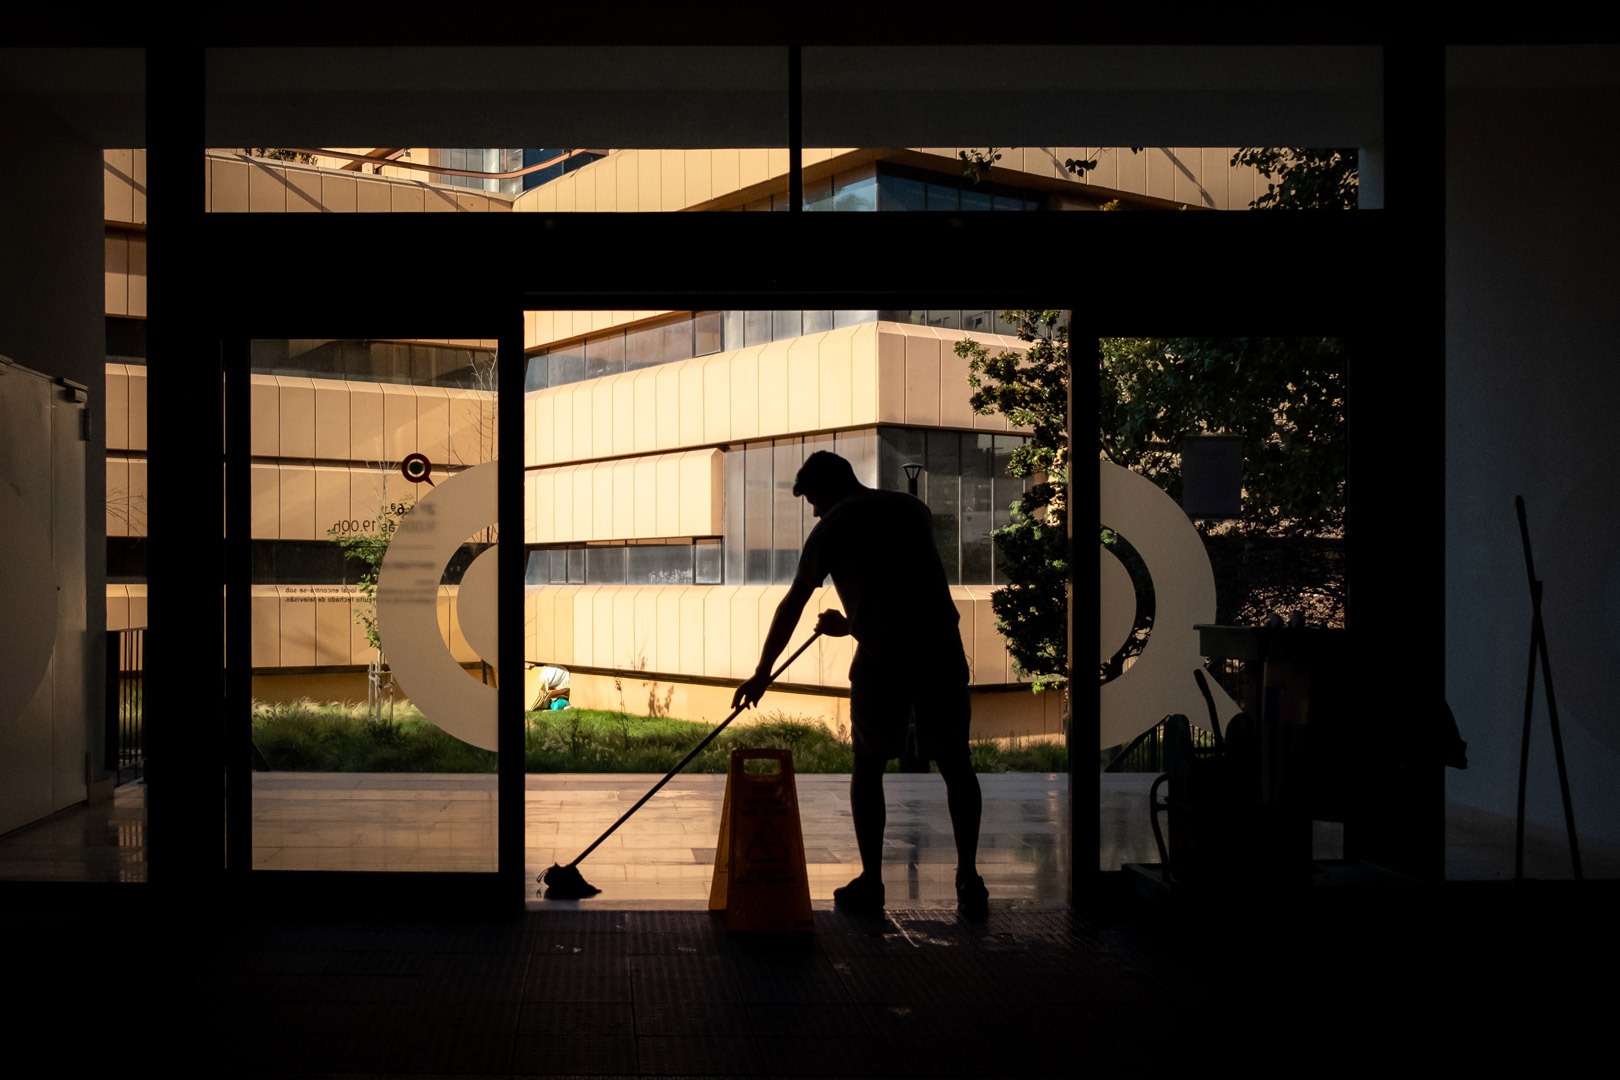 Commercial Cleaning and Janitorial Services. About us